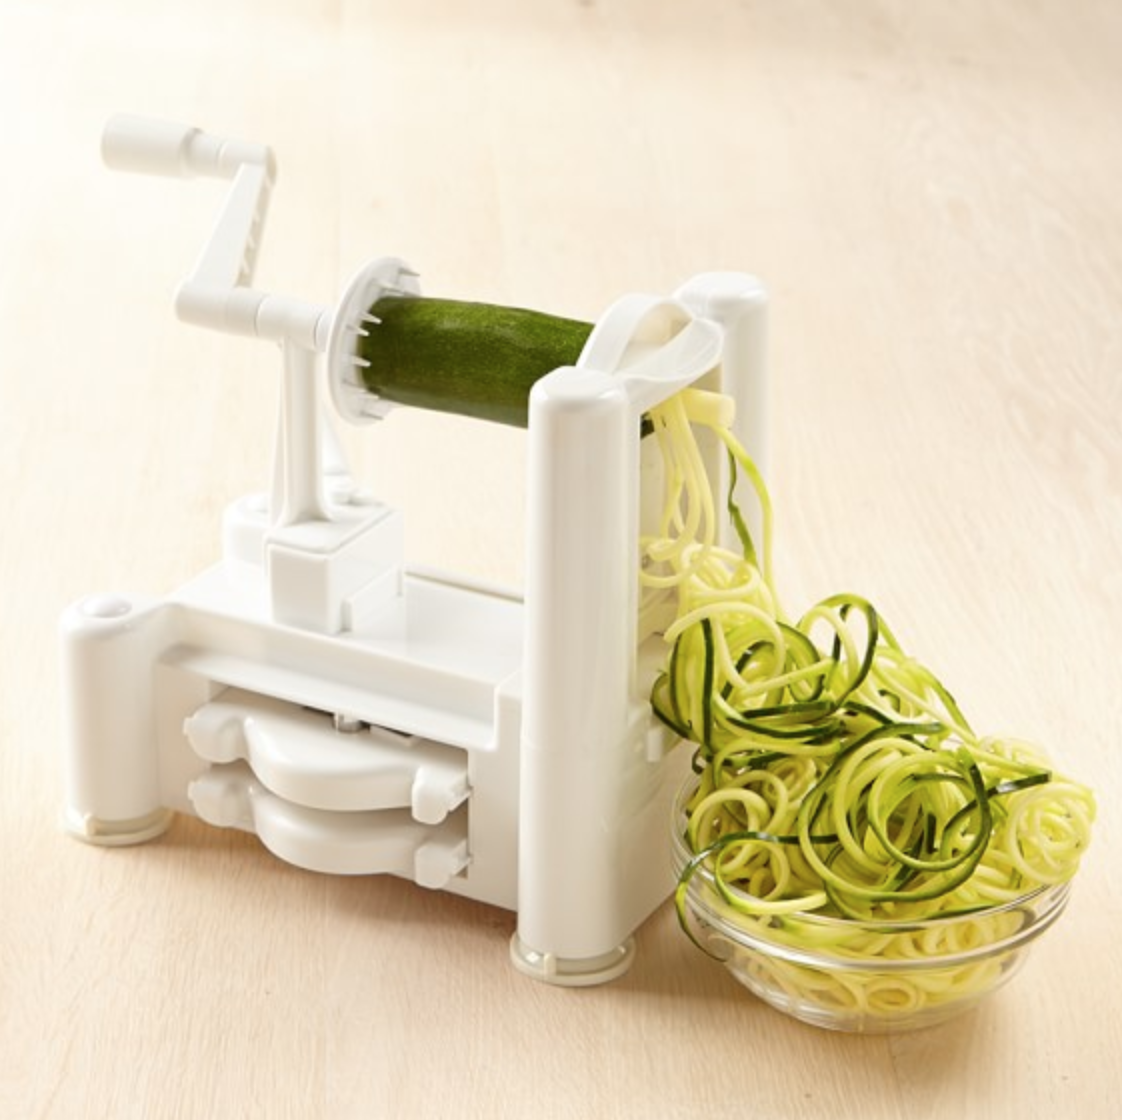 An Honest Review of the Veggetti Spiral Vegetable Cutter - Miss Mikes Place